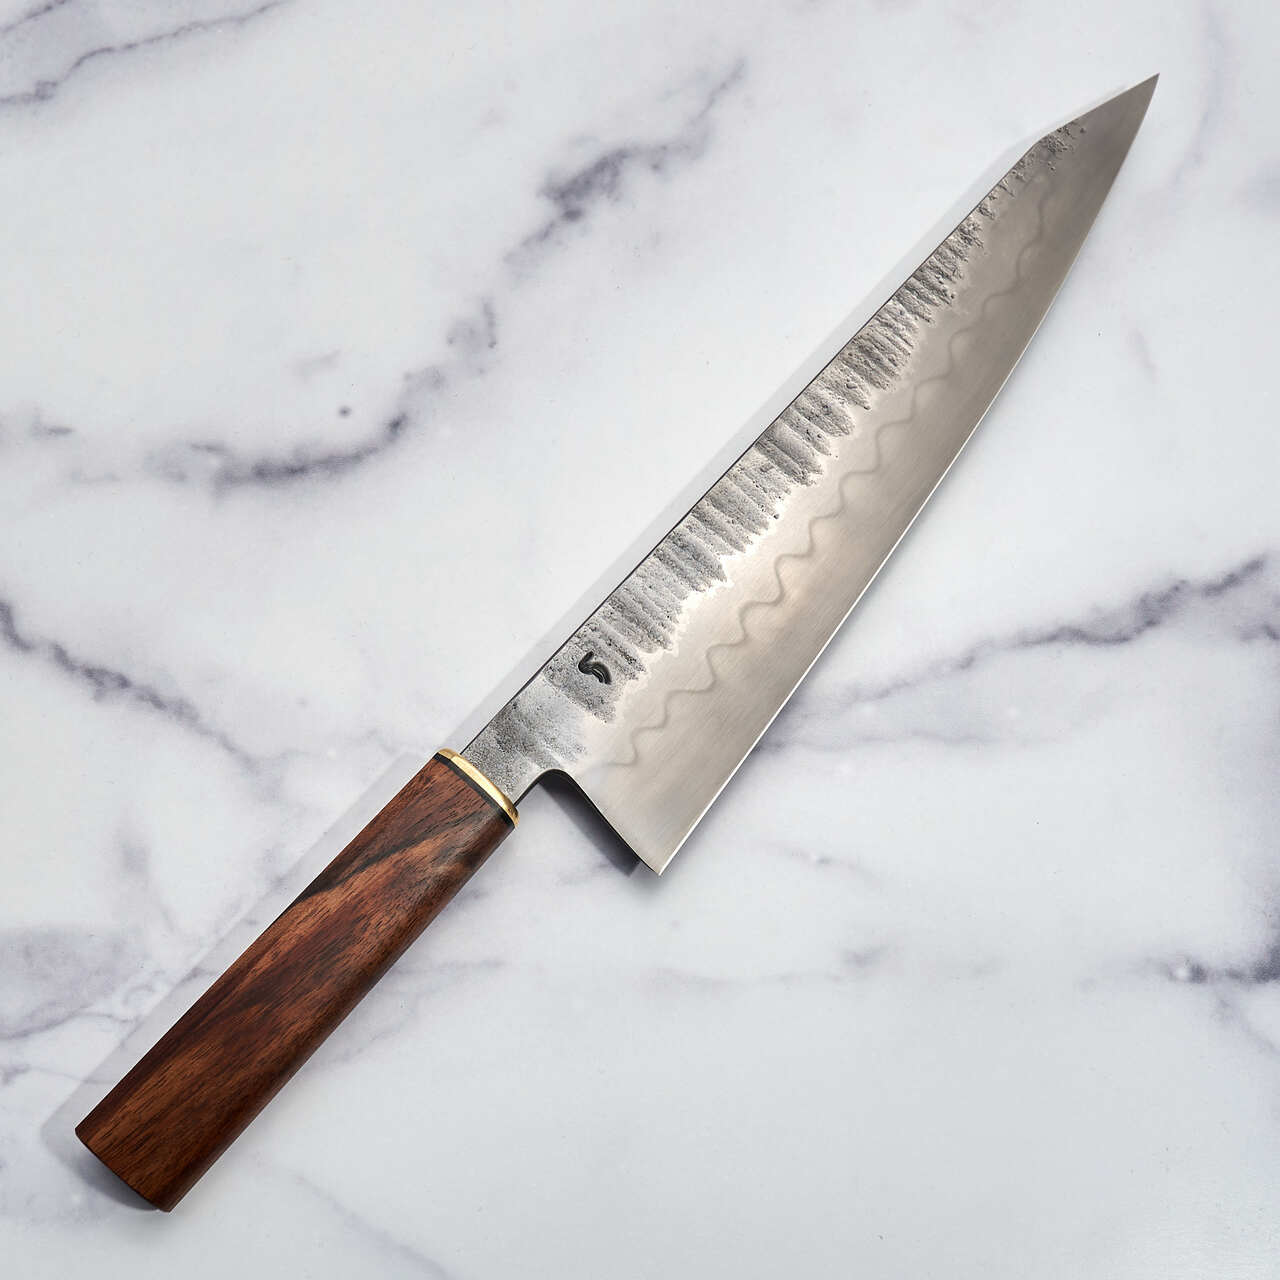 MCX K-Tip Gyuto 250mm 26c3 Limited Release by Fredrik Spåre - 2nd Edition - Blade